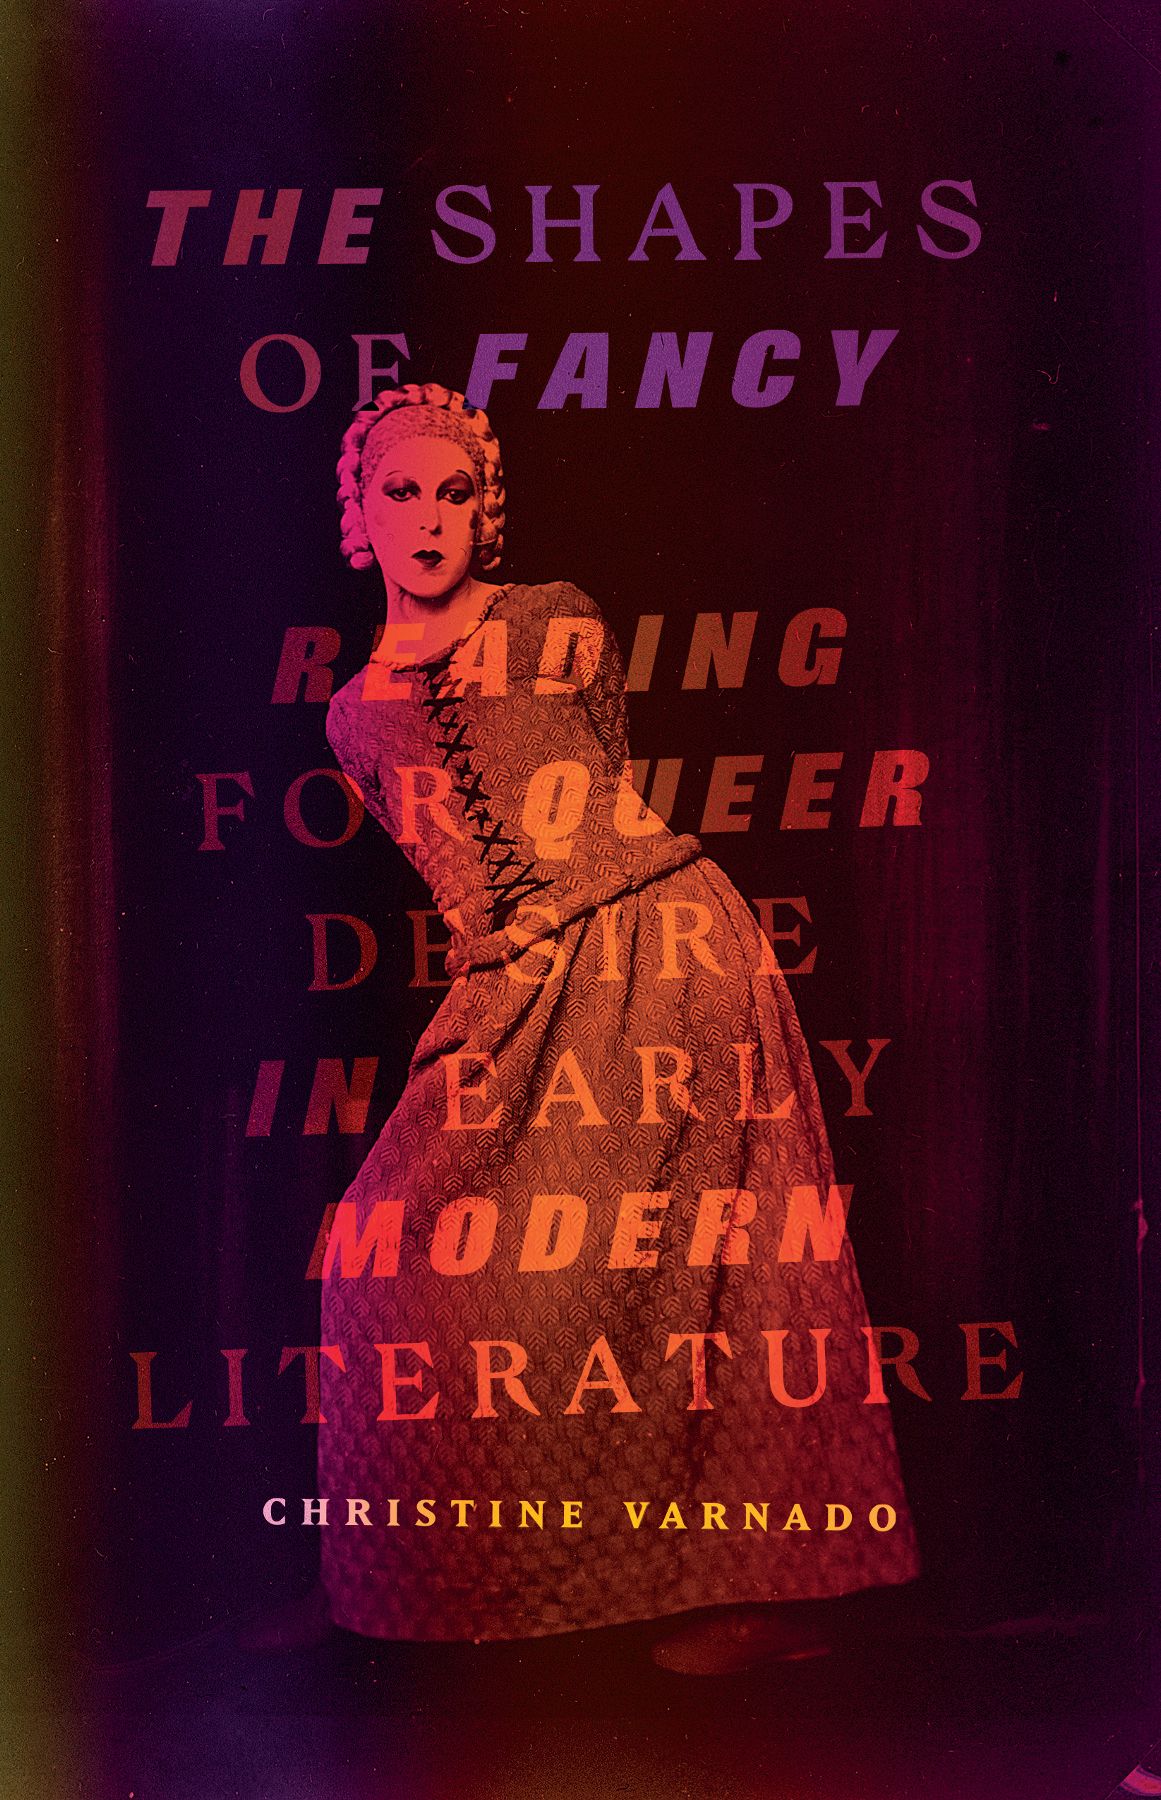 Cover, depicting a person in a dress with hip out and arms behind the back